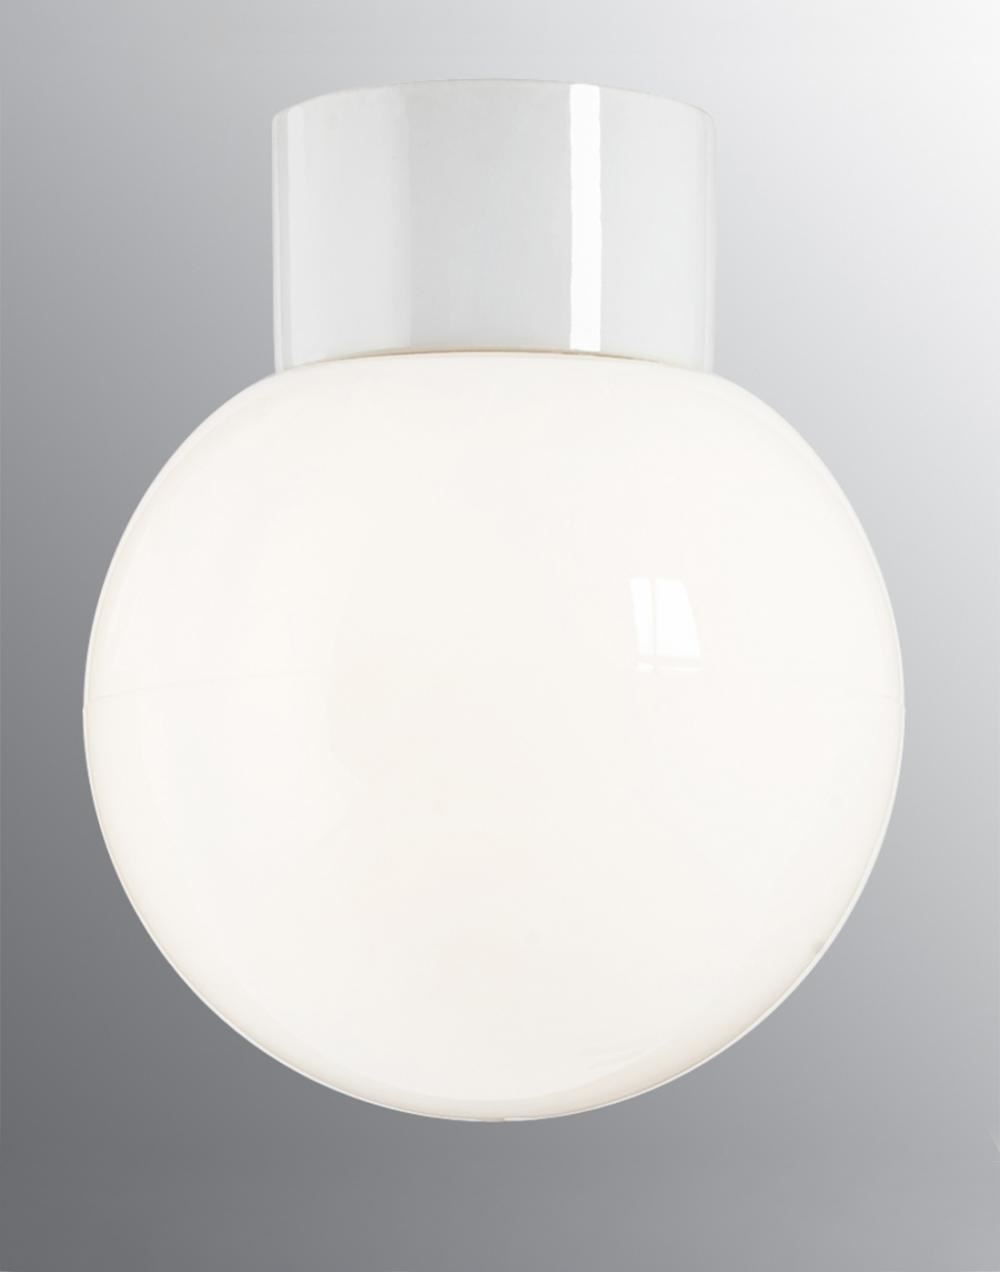 Classic Globe Ceramic Bathroom Wall Or Ceiling Light Small Clear Glass White Base